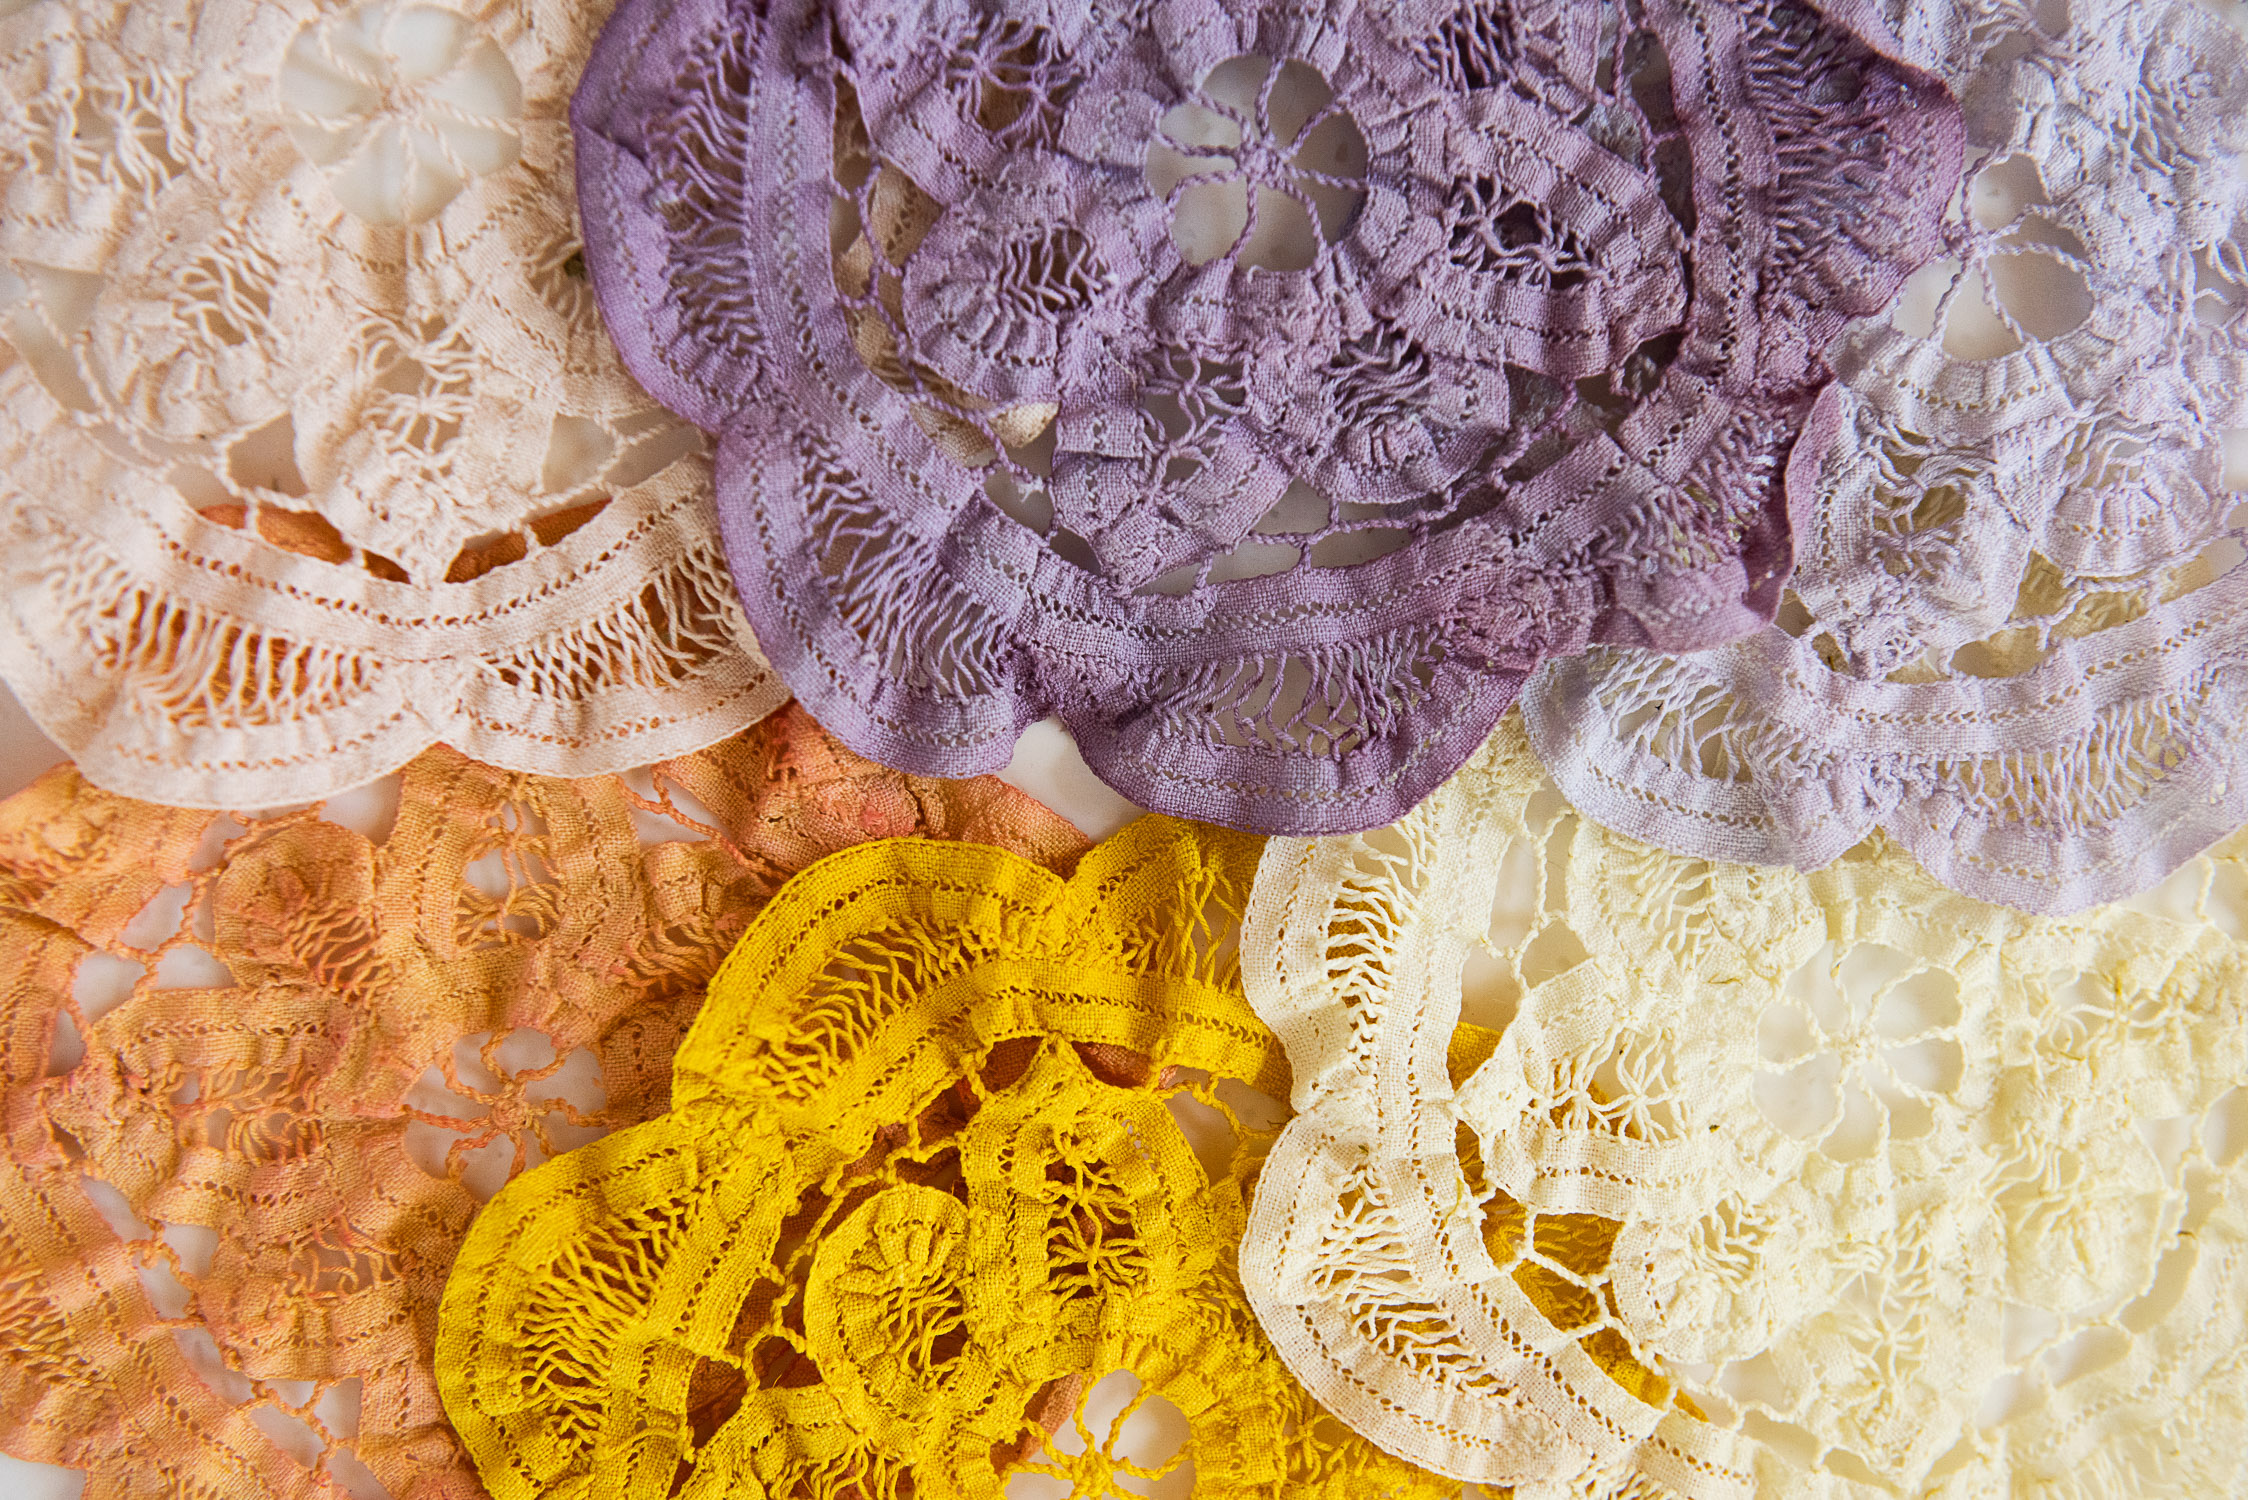 15 Reasons Your Natural Dye Project FAILED (And Why You Should Do